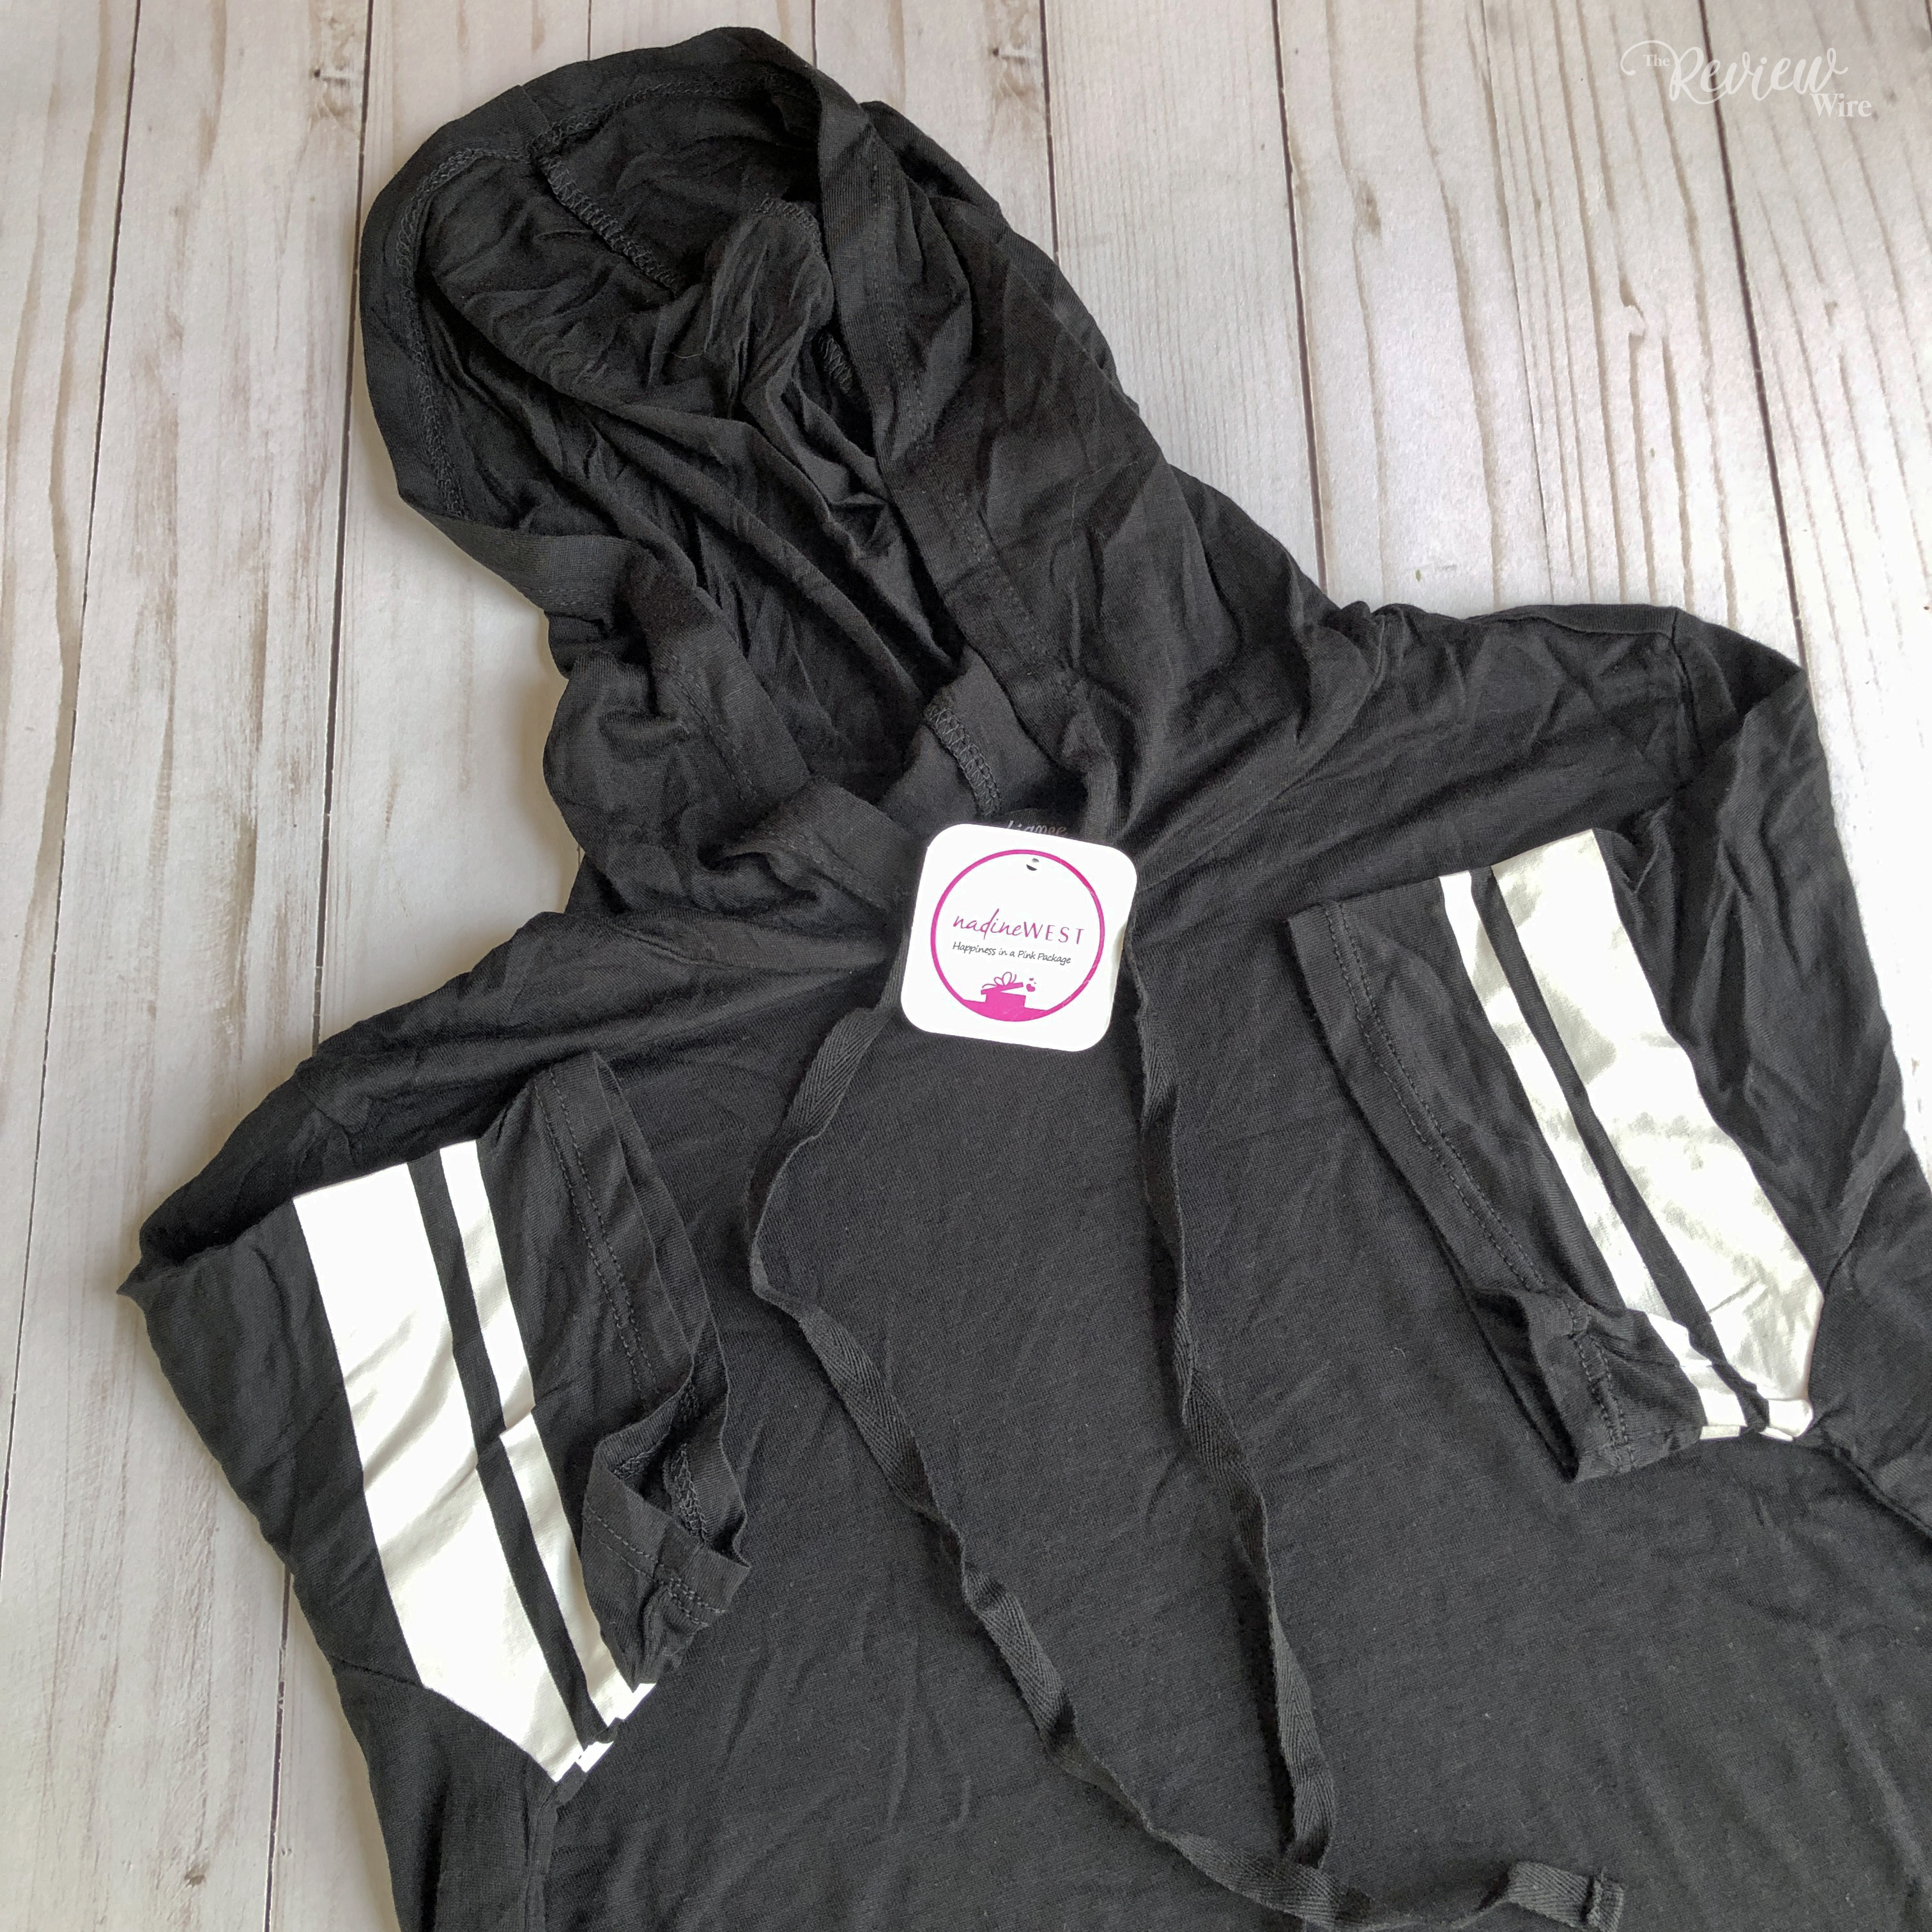 The Review Wire Nadine West April 2019 Black Hoodie T-shirt